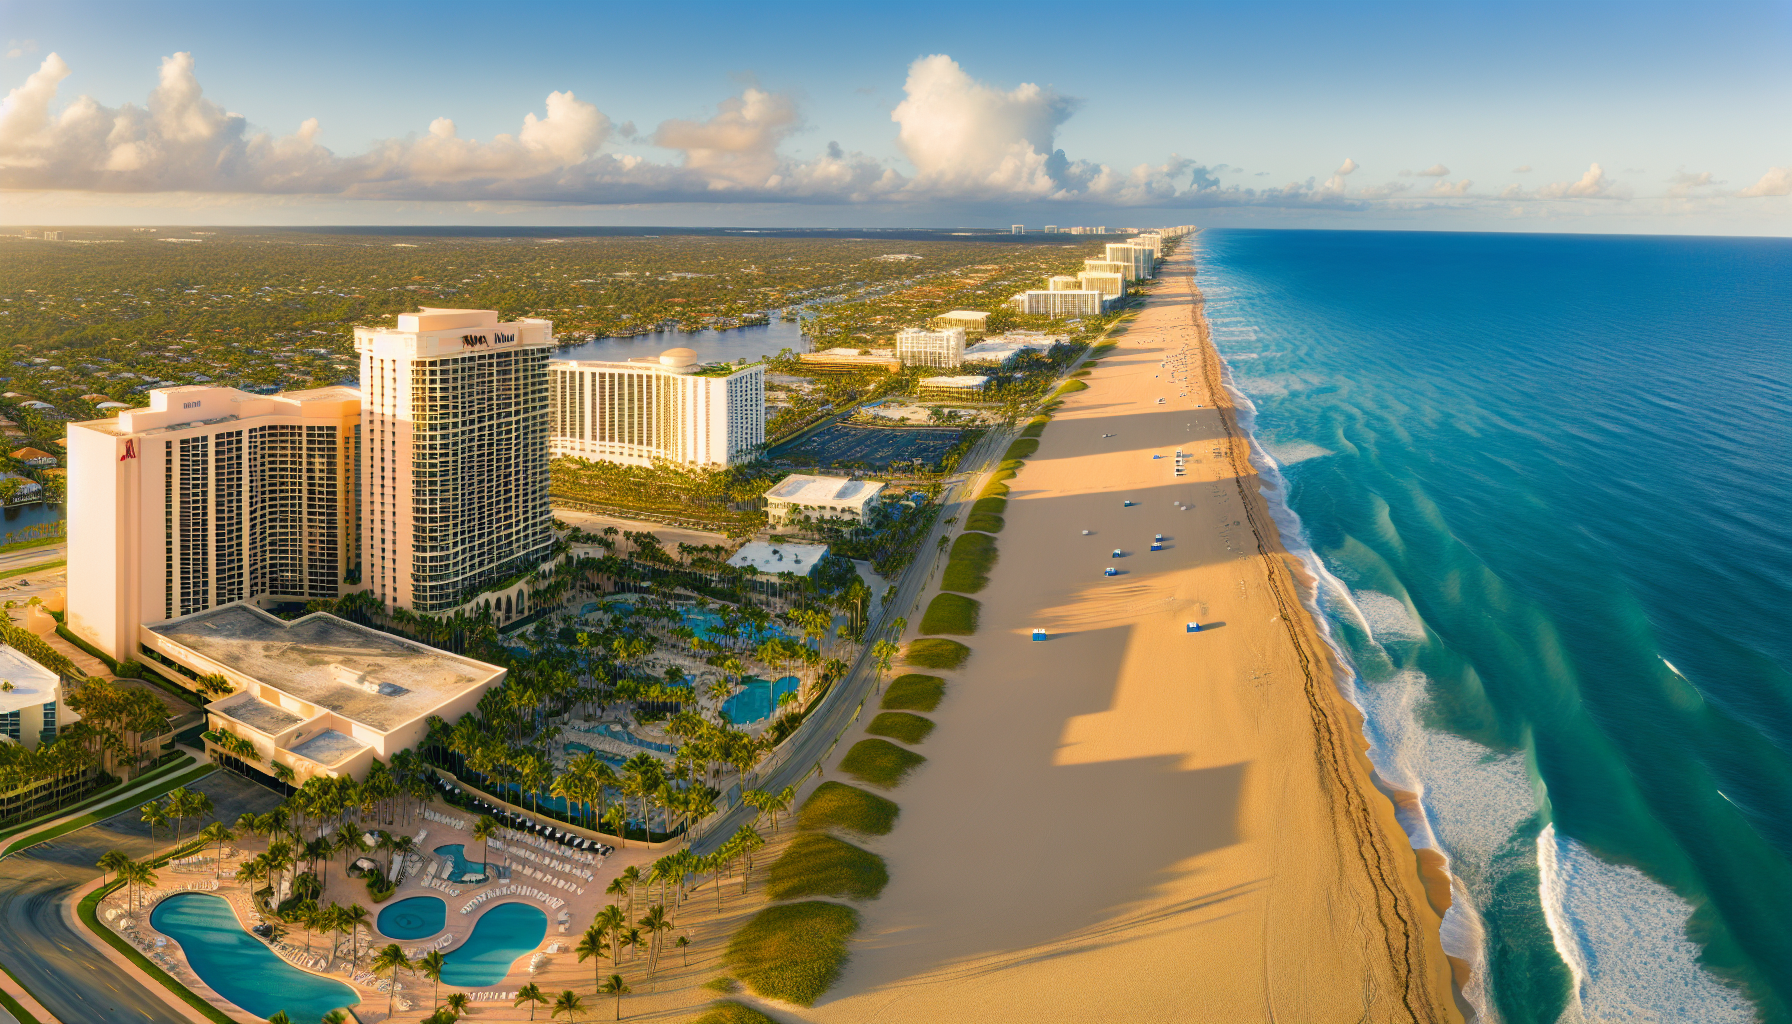 Aerial view of Fort Lauderdale beach and marriott hotels